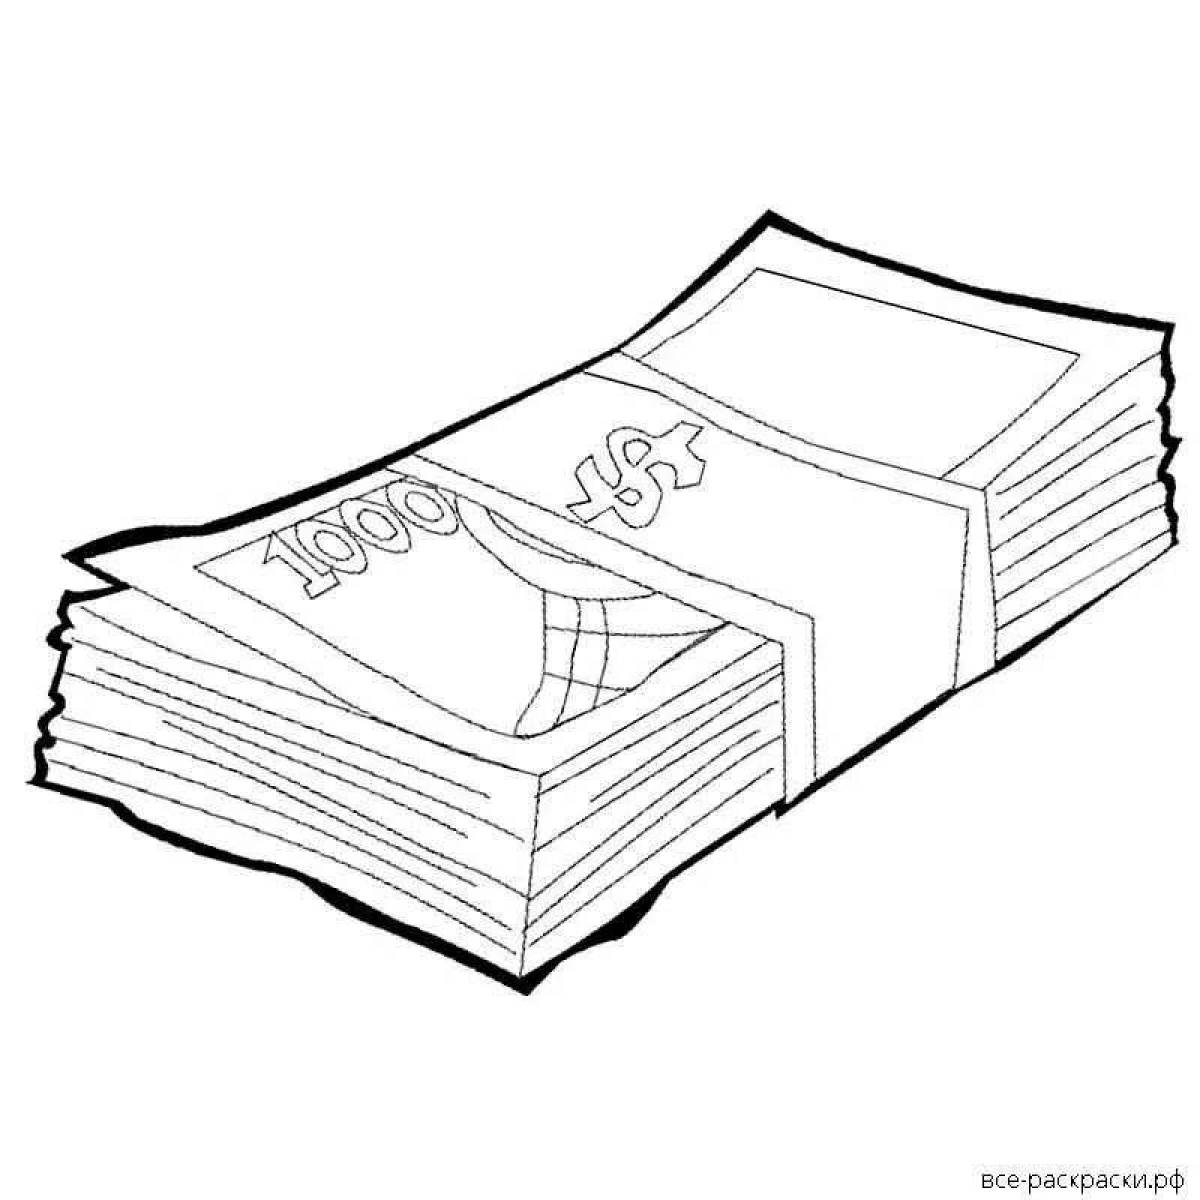 Exciting coloring pages of money rubles